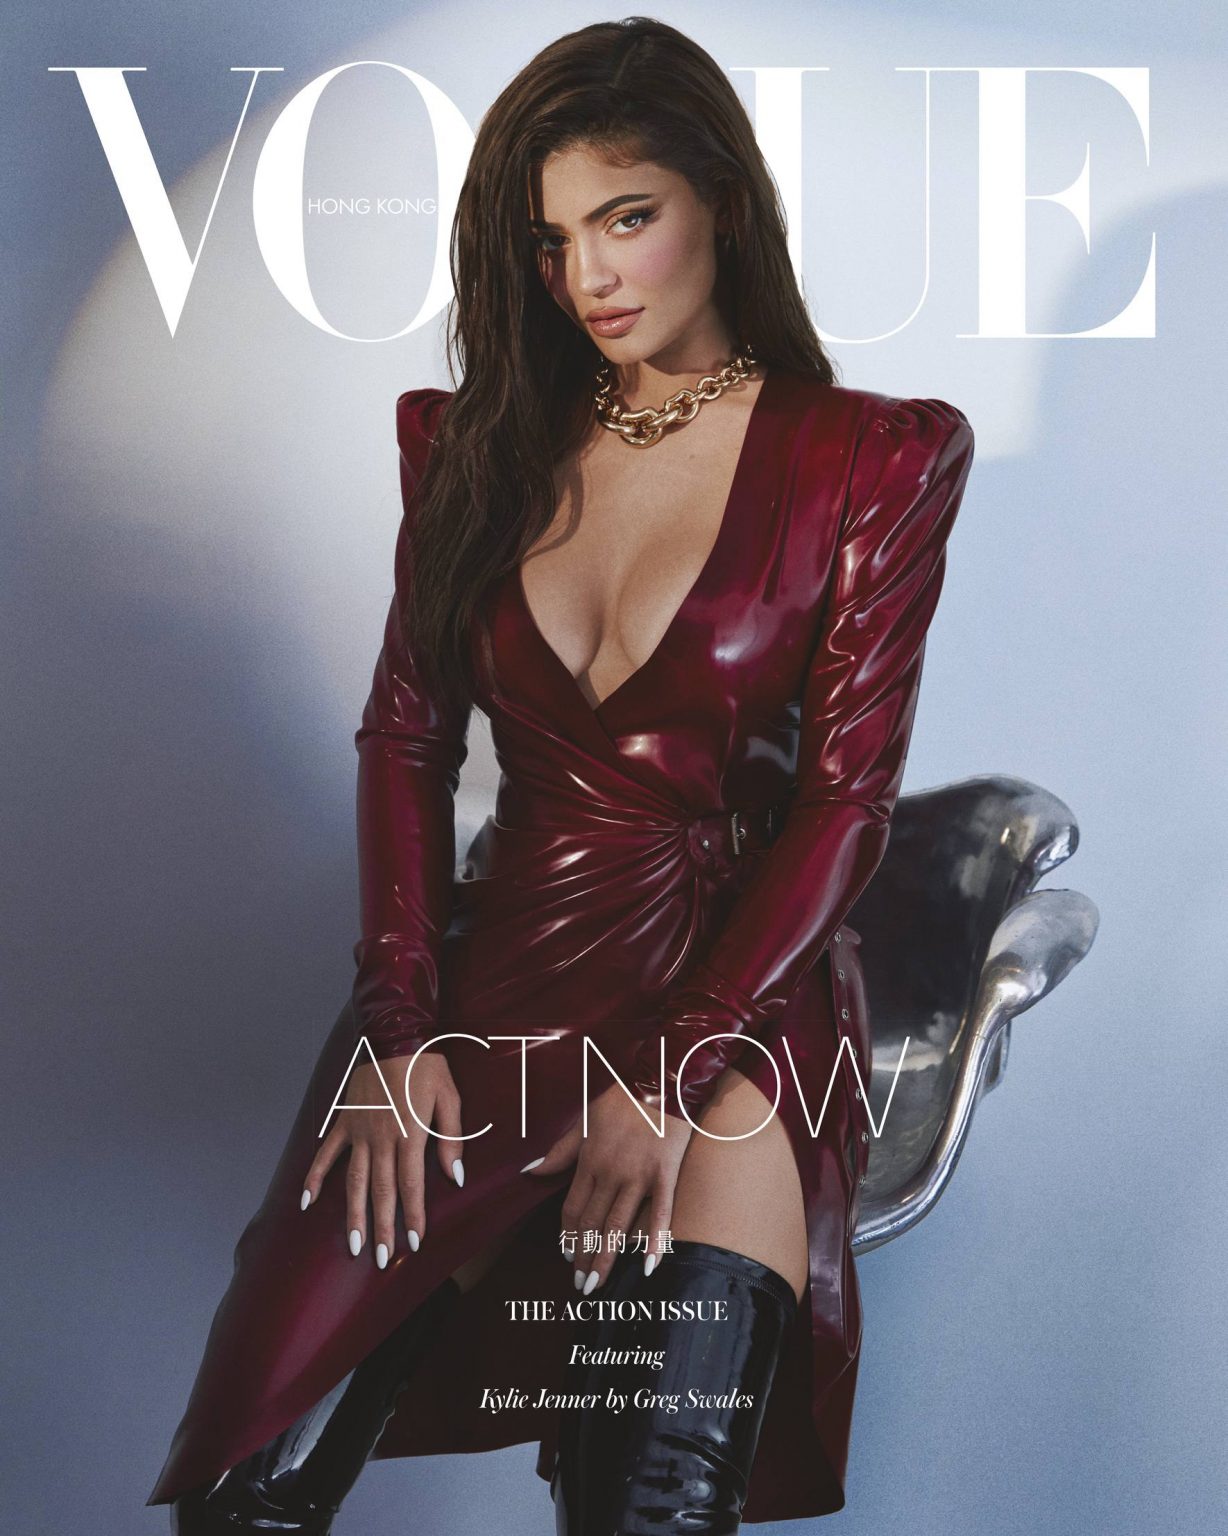 Photos n°6 : Kylie Jenner Airbrushed to Oblivion for Vogue!